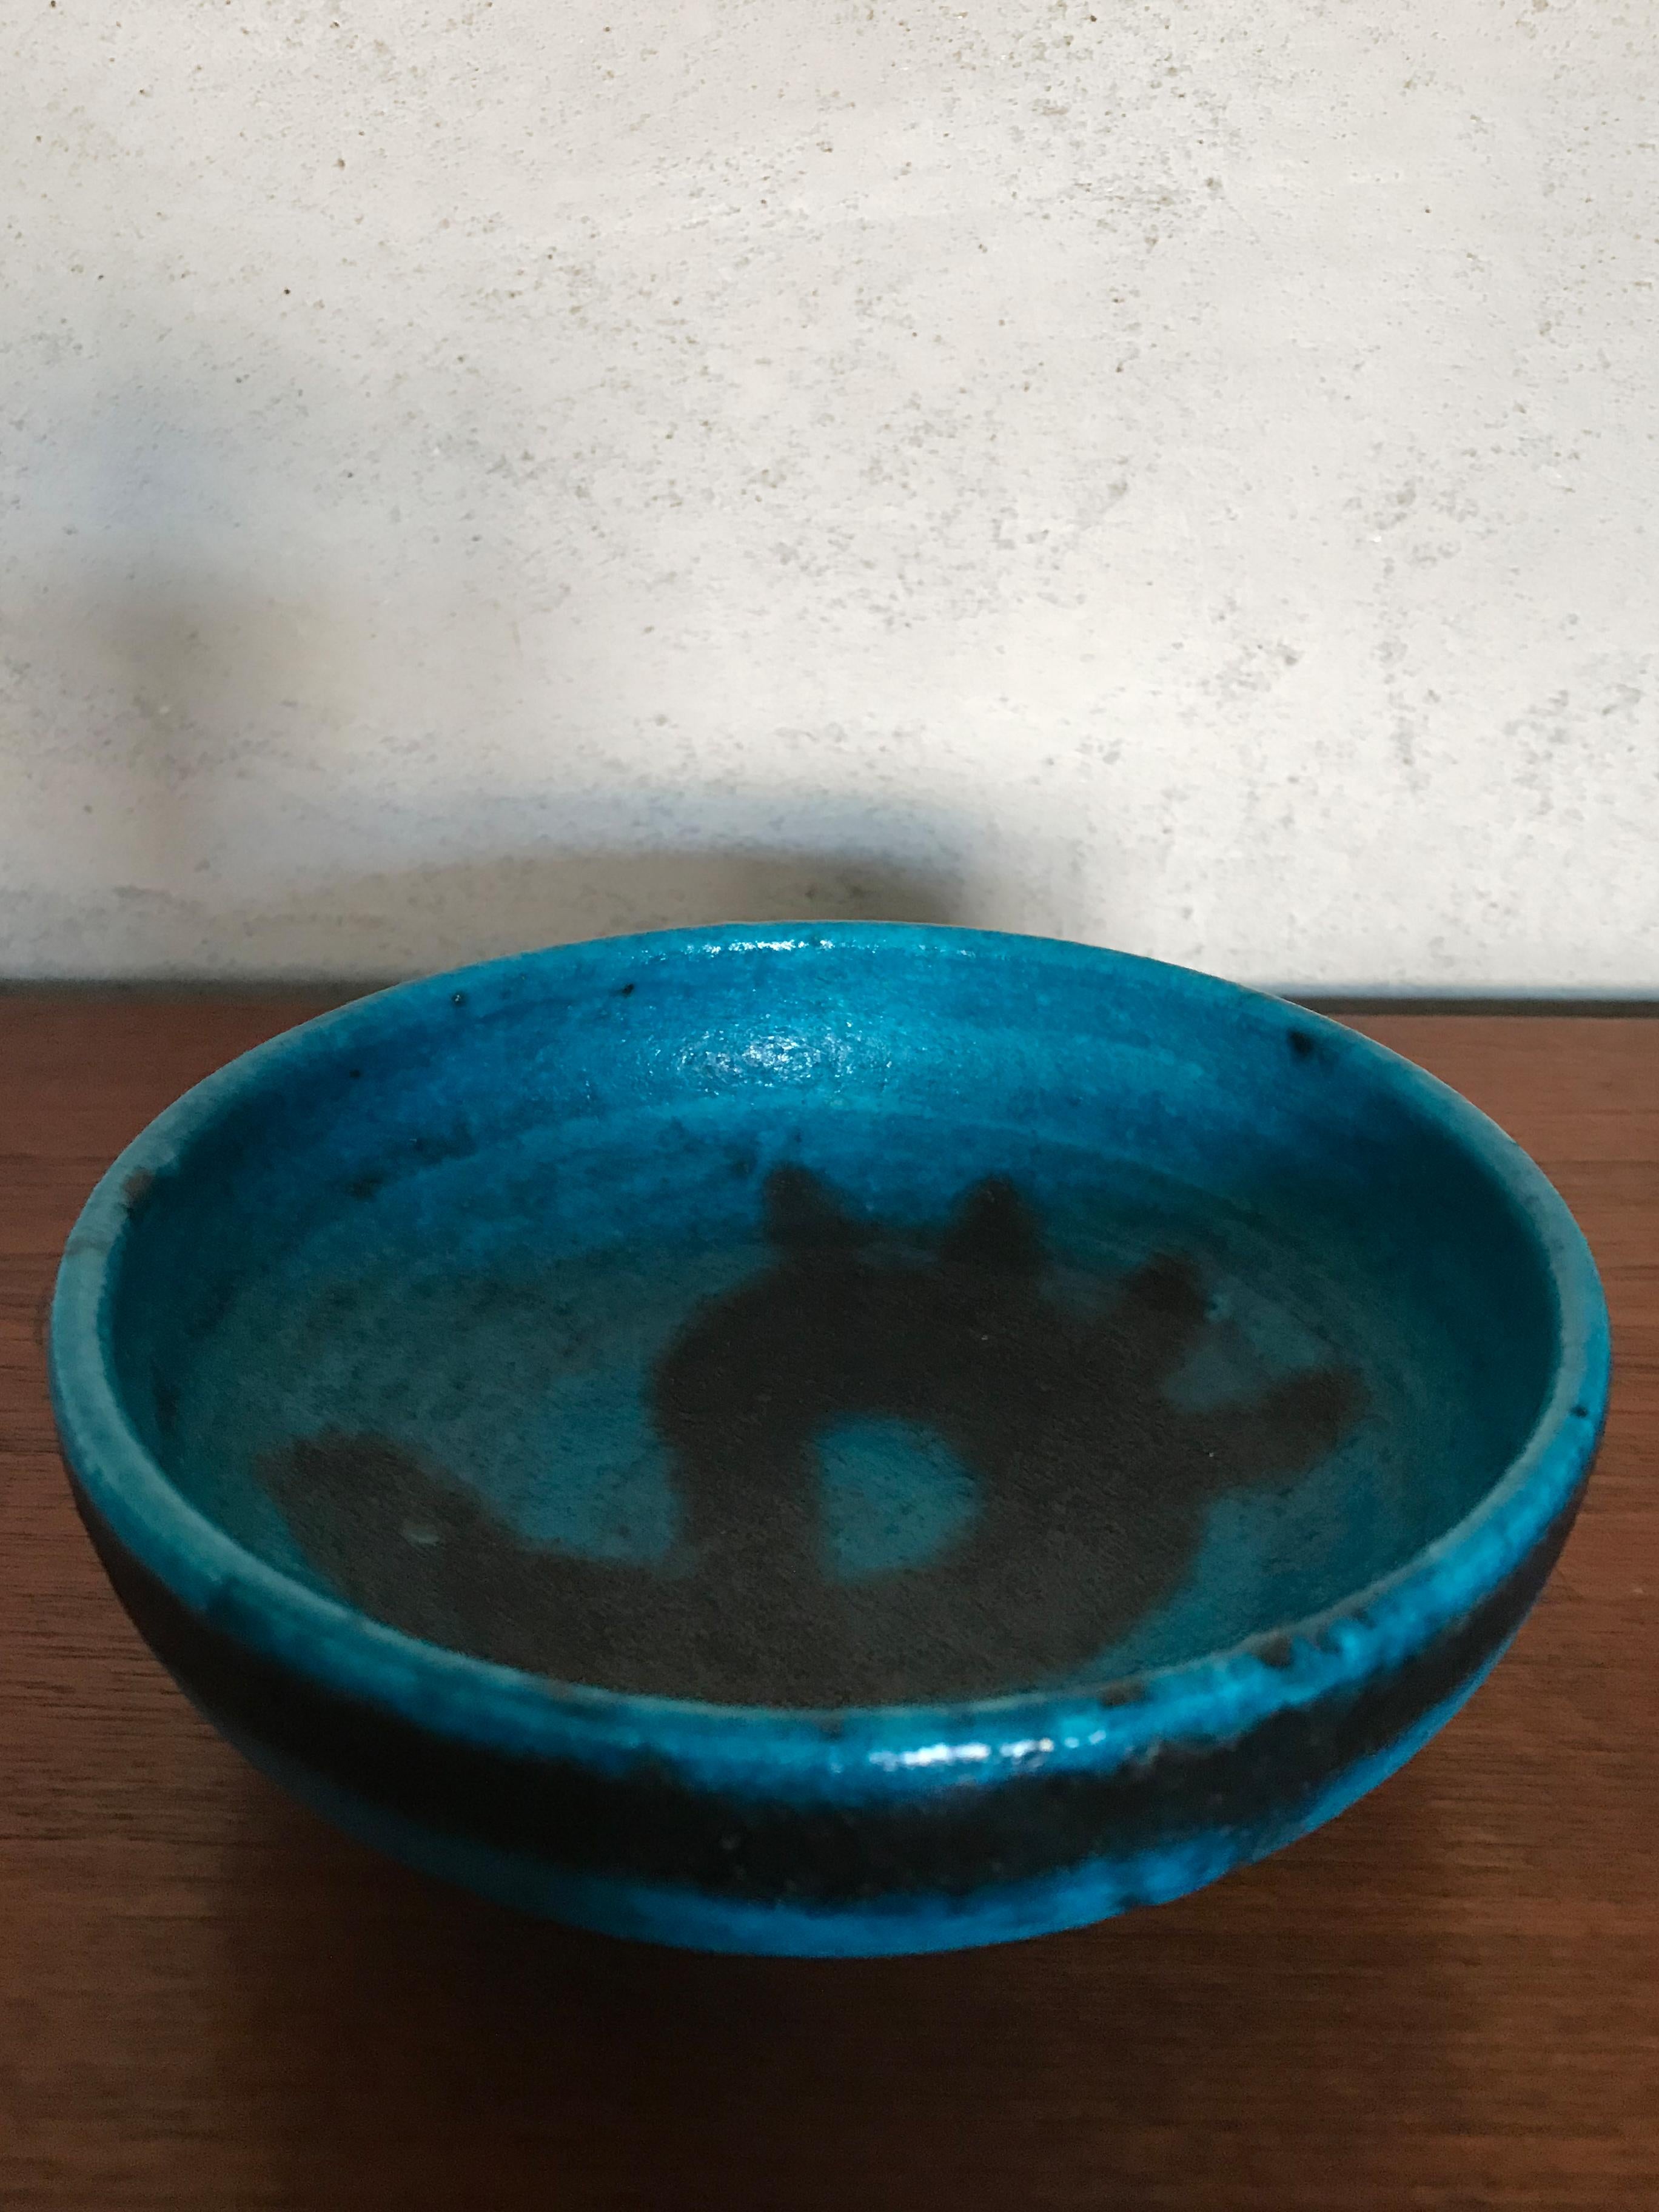 Mid-Century Modern design ceramic bowl designed by Italian artist Guido Gambone with “Gambone Italy” printed under the base, 1950s.

Please note that the bowl is original of the period and this shows normal signs of age and use.